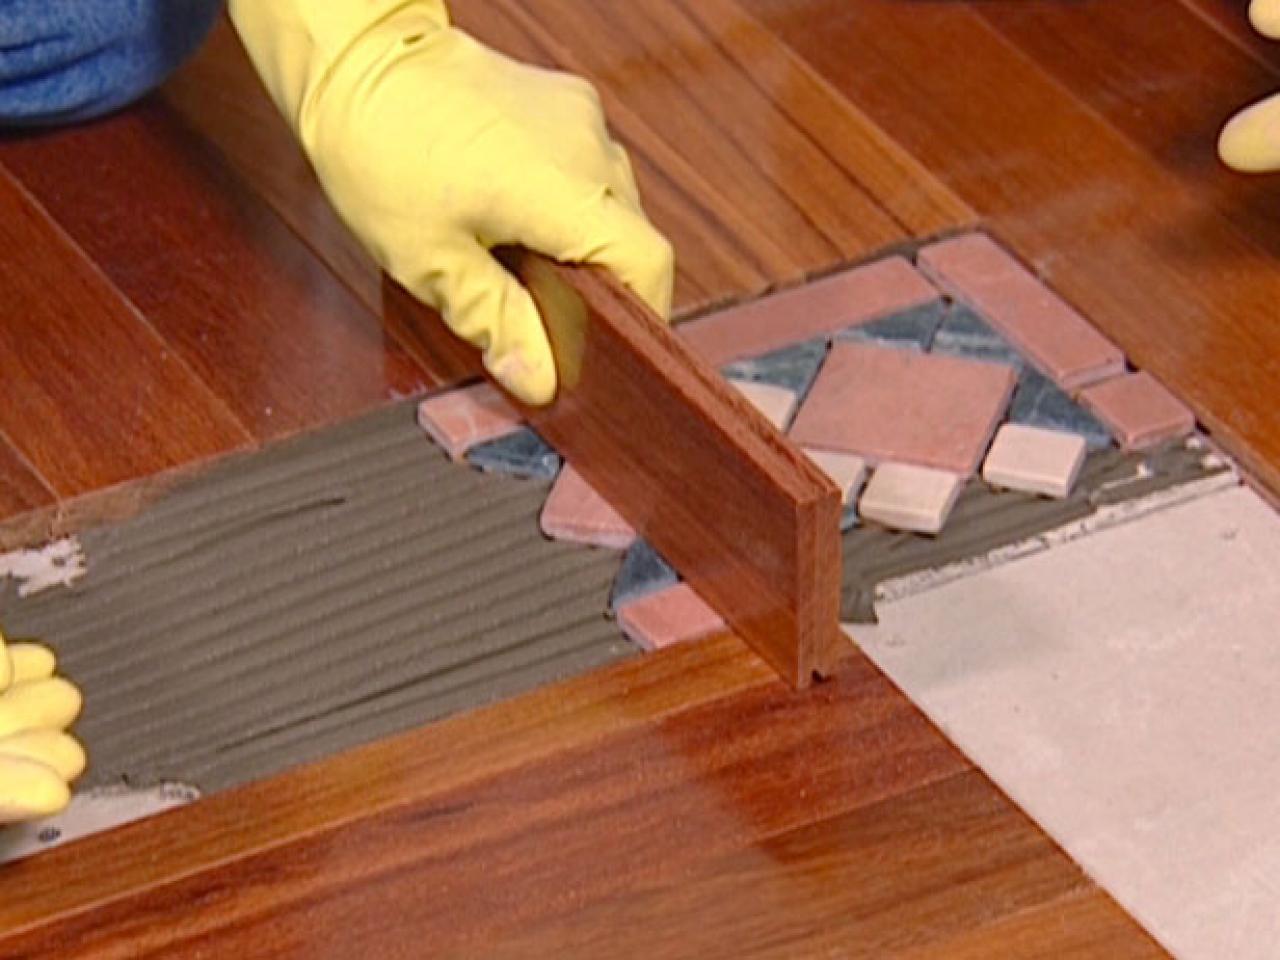 How To Install A Mixed Media Floor, Tile And Wood Floor Combination Pattern